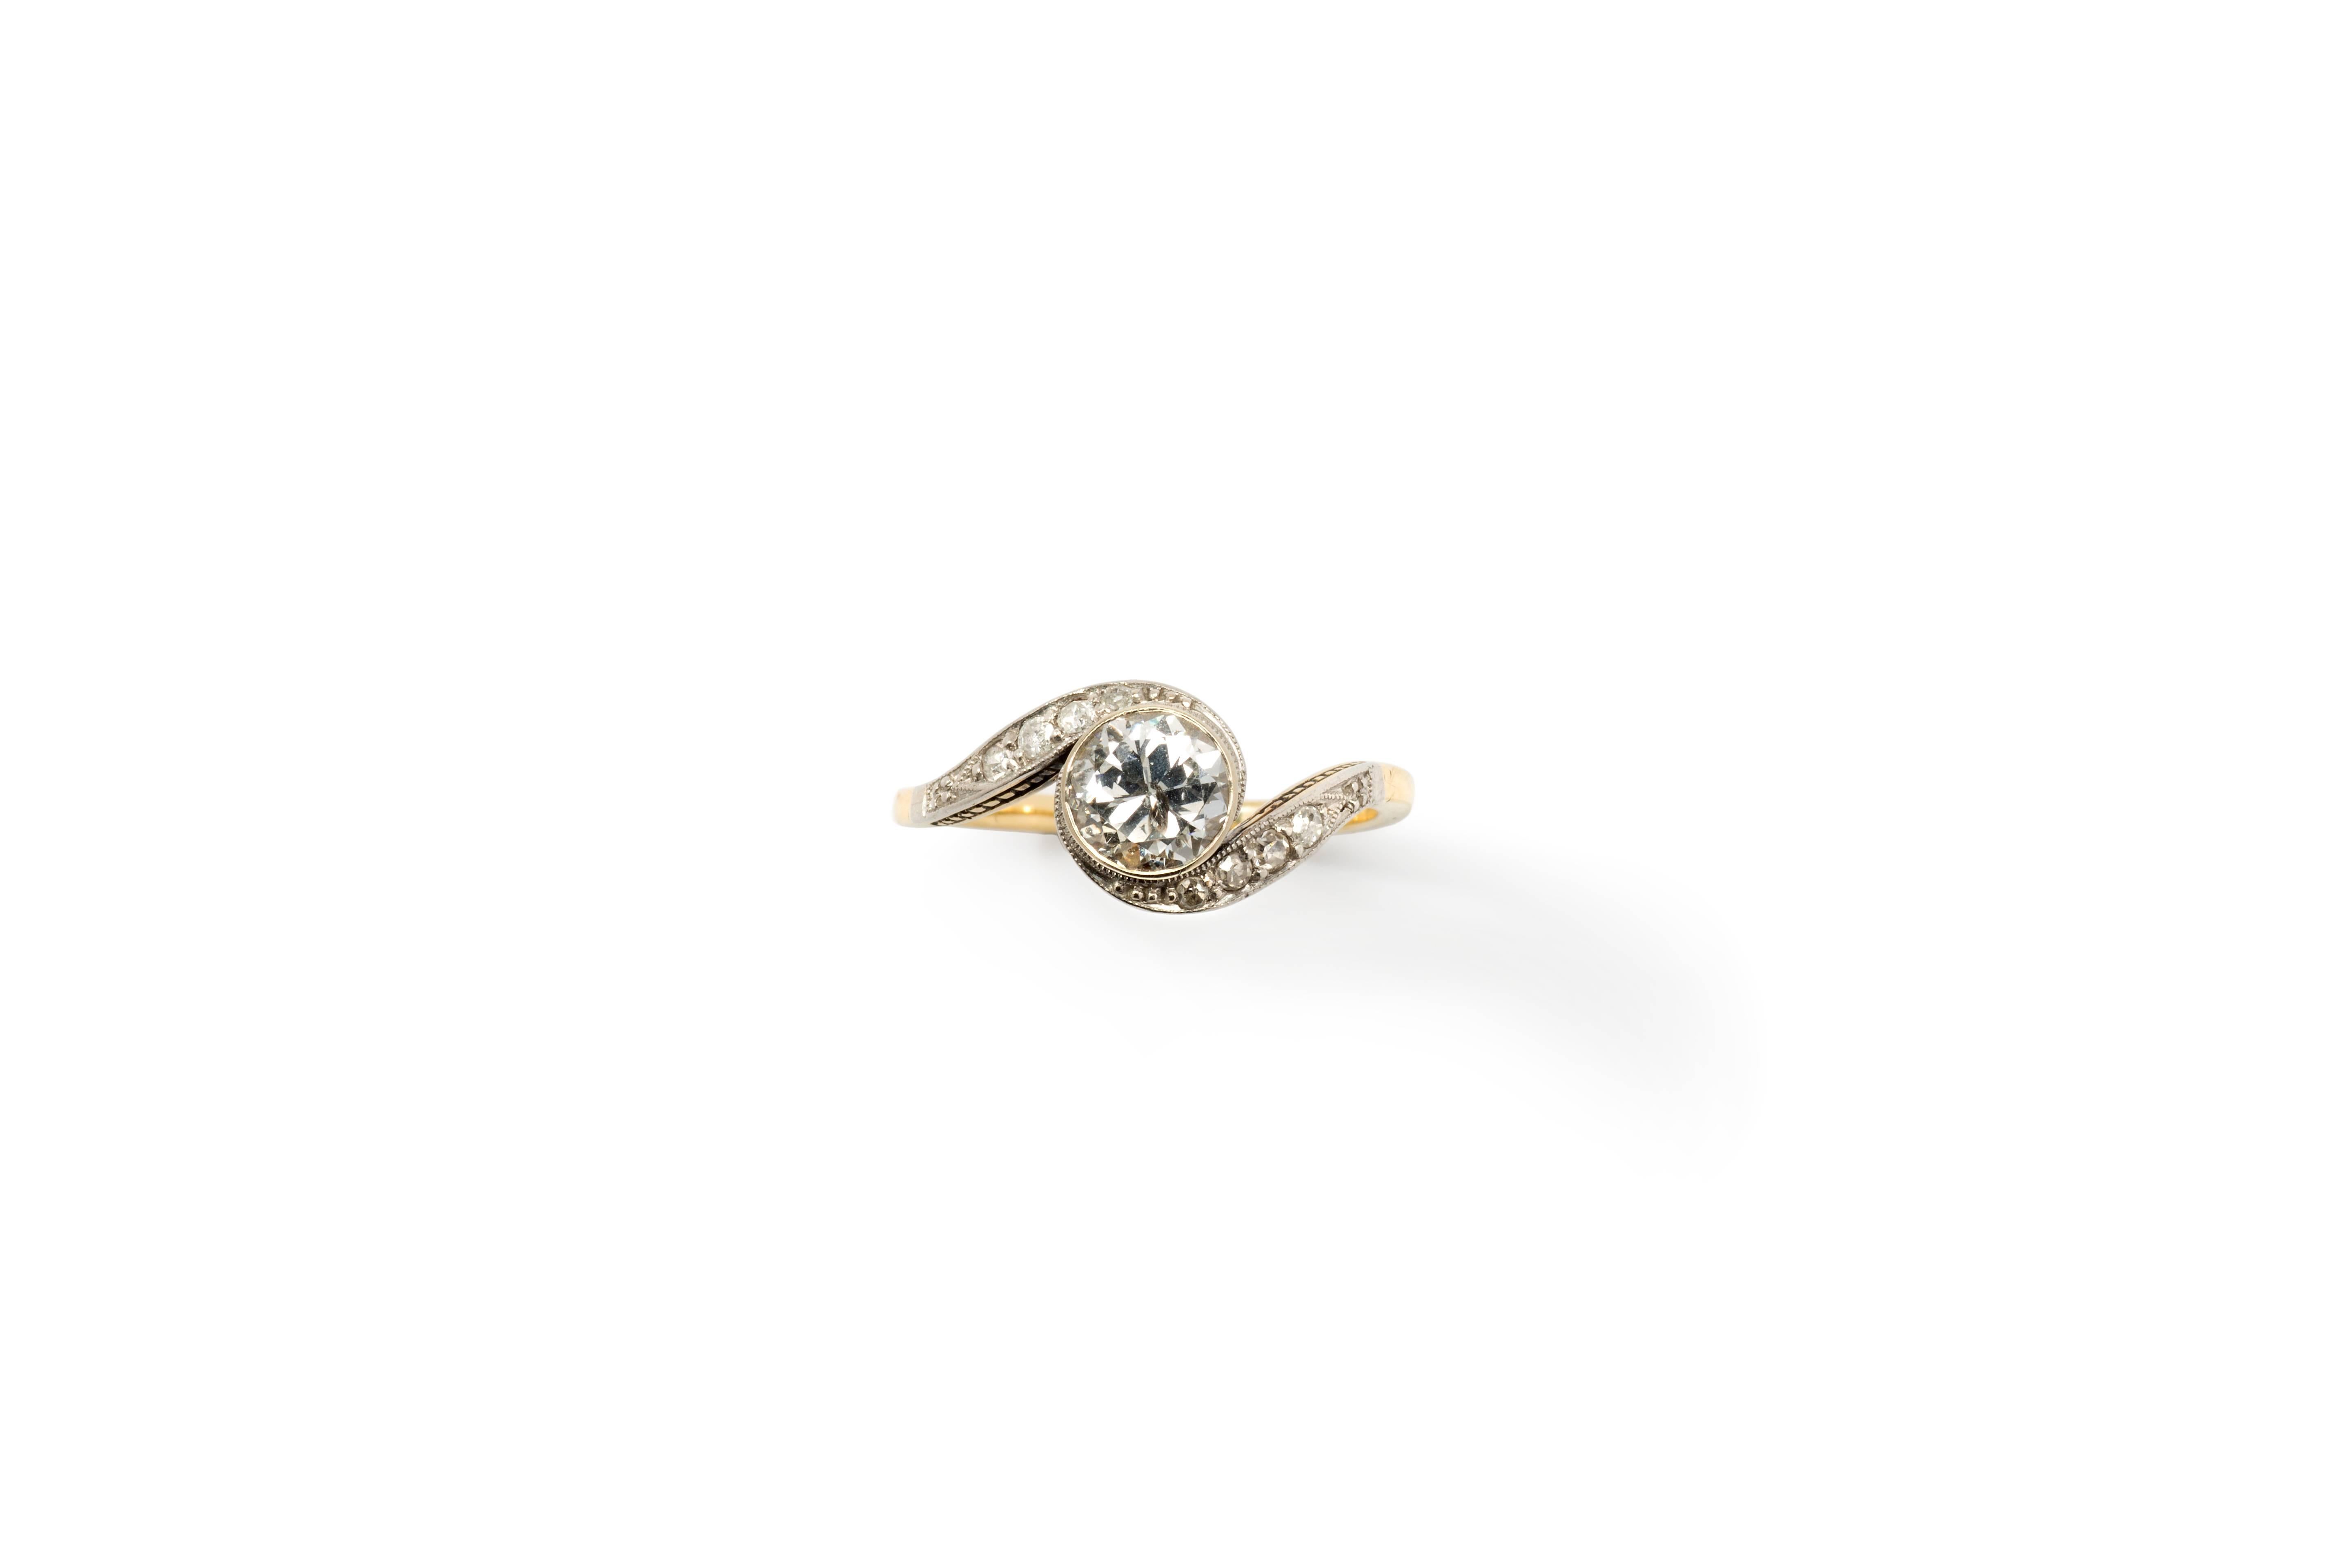 Germany, 1920's. Set with brilliant-cut solitaire diamond weighing circa 1,06 ct., clarity P1-2. On both sides accented by ever 4 diamonds with a total weight of ca. 0,17 ct. Millegrain setting. Mounted in 14 K white- and yellow gold. 
Hallmarked